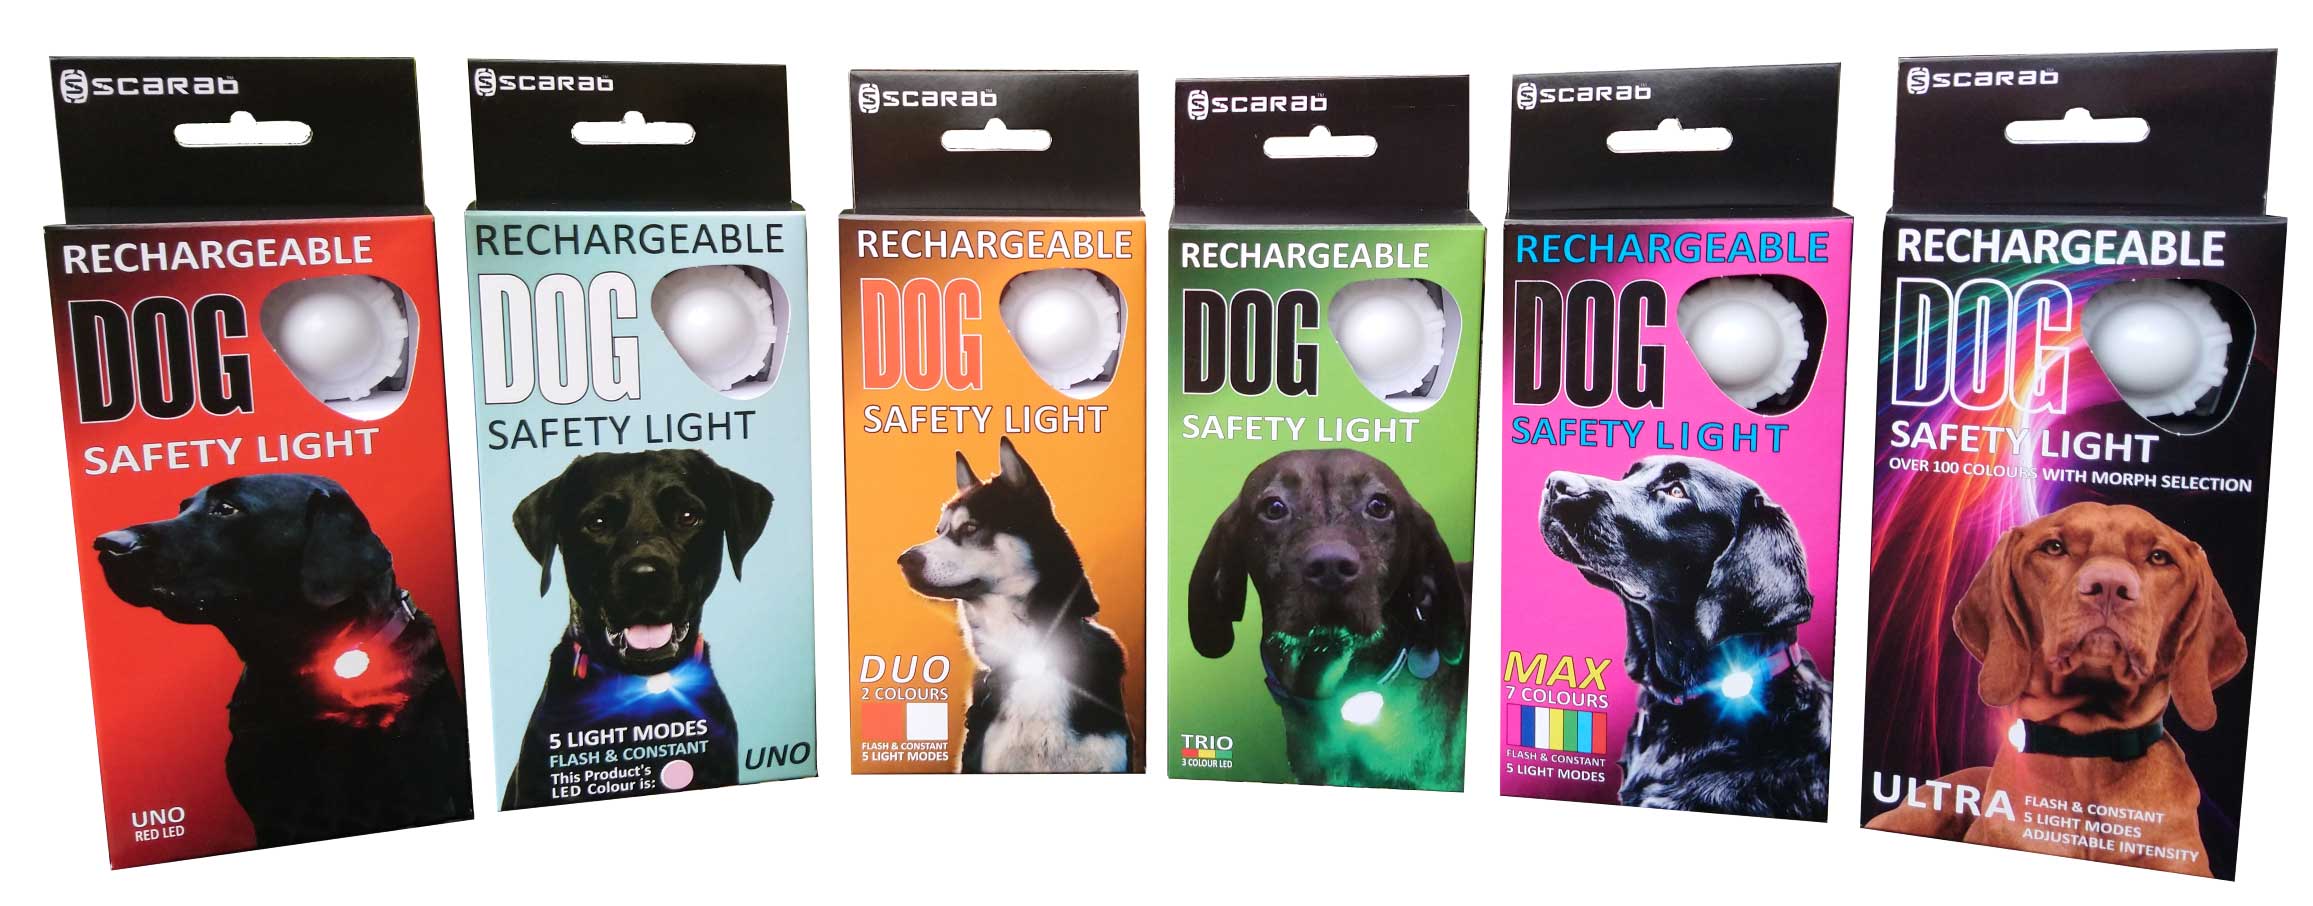 All Scarab Dog Light Products